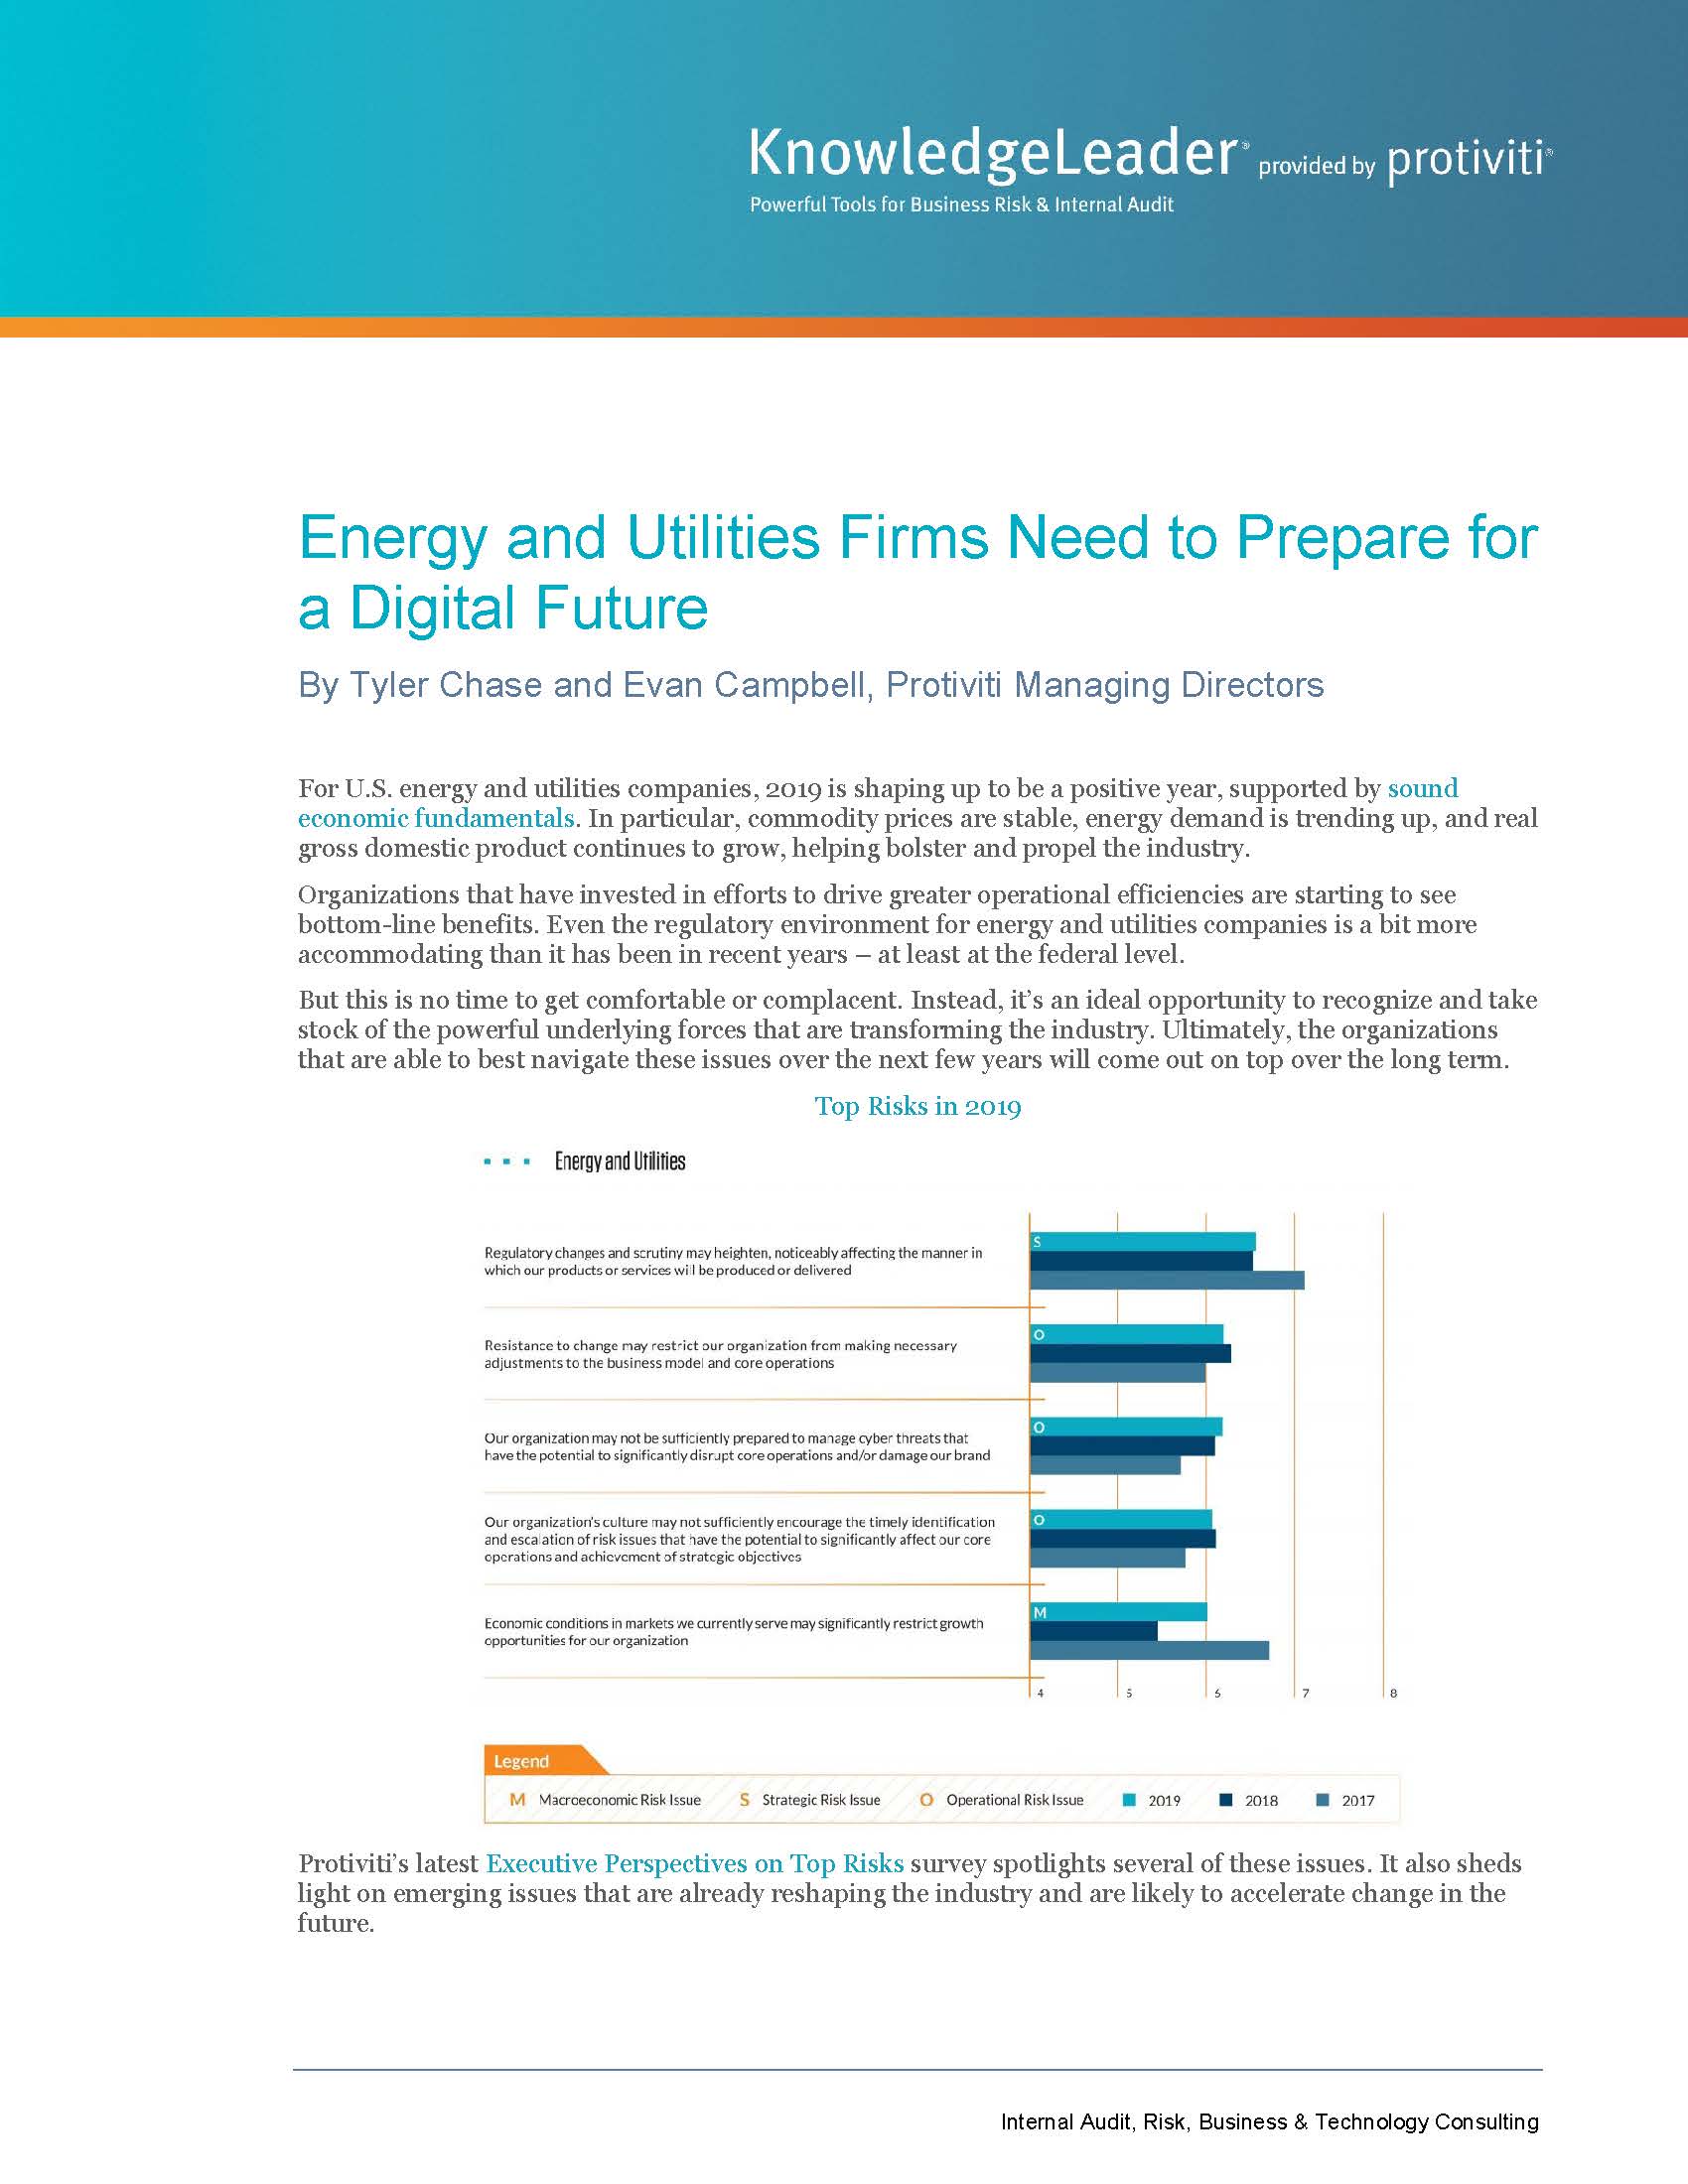 Screenshot of the first page of Energy and Utilities Firms Need to Prepare for a Digital Future